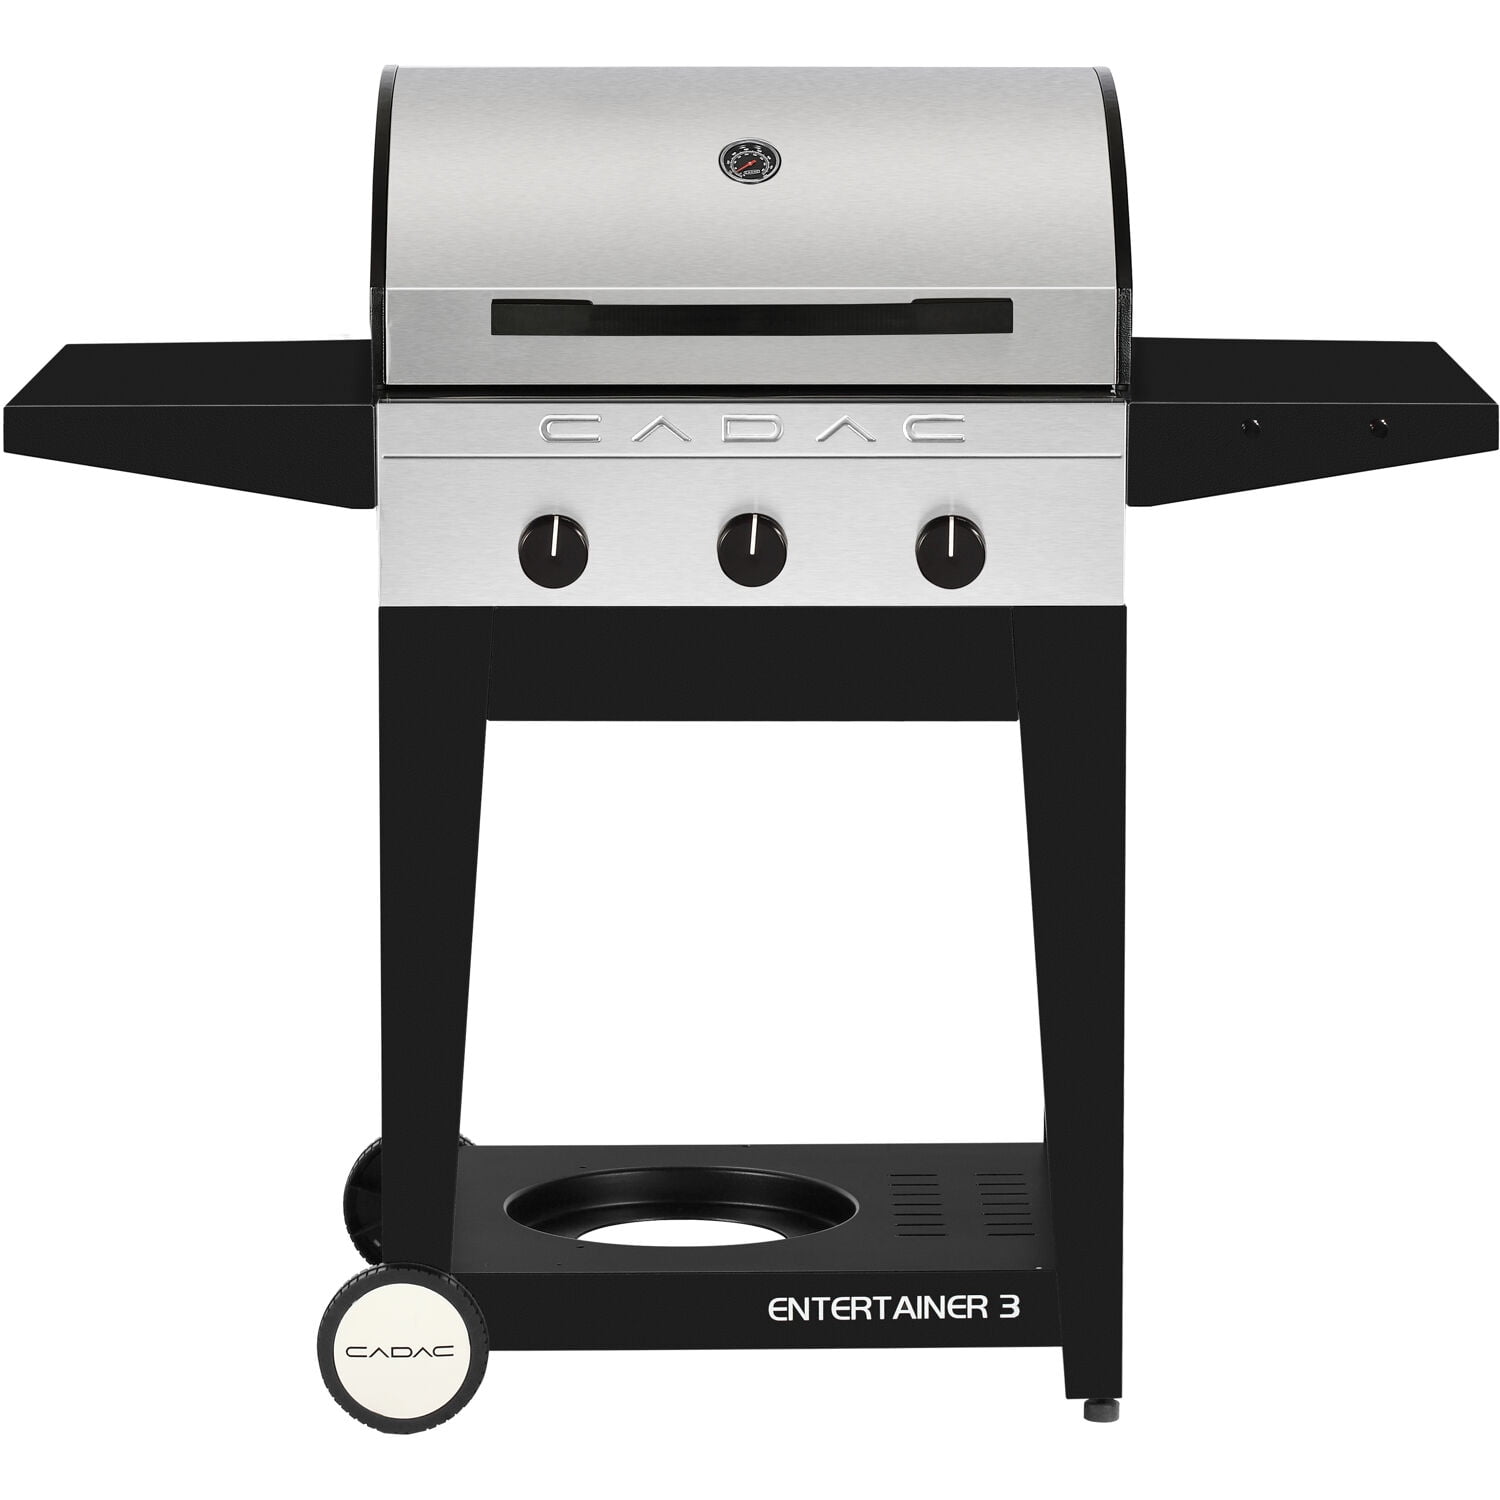 Monument Baan Vol Cadac Entertainer 3 Gas BBQ Grill with 3 Burners, plus Open Cart with Sides  Tables and Tank Storage Shelf - Walmart.com